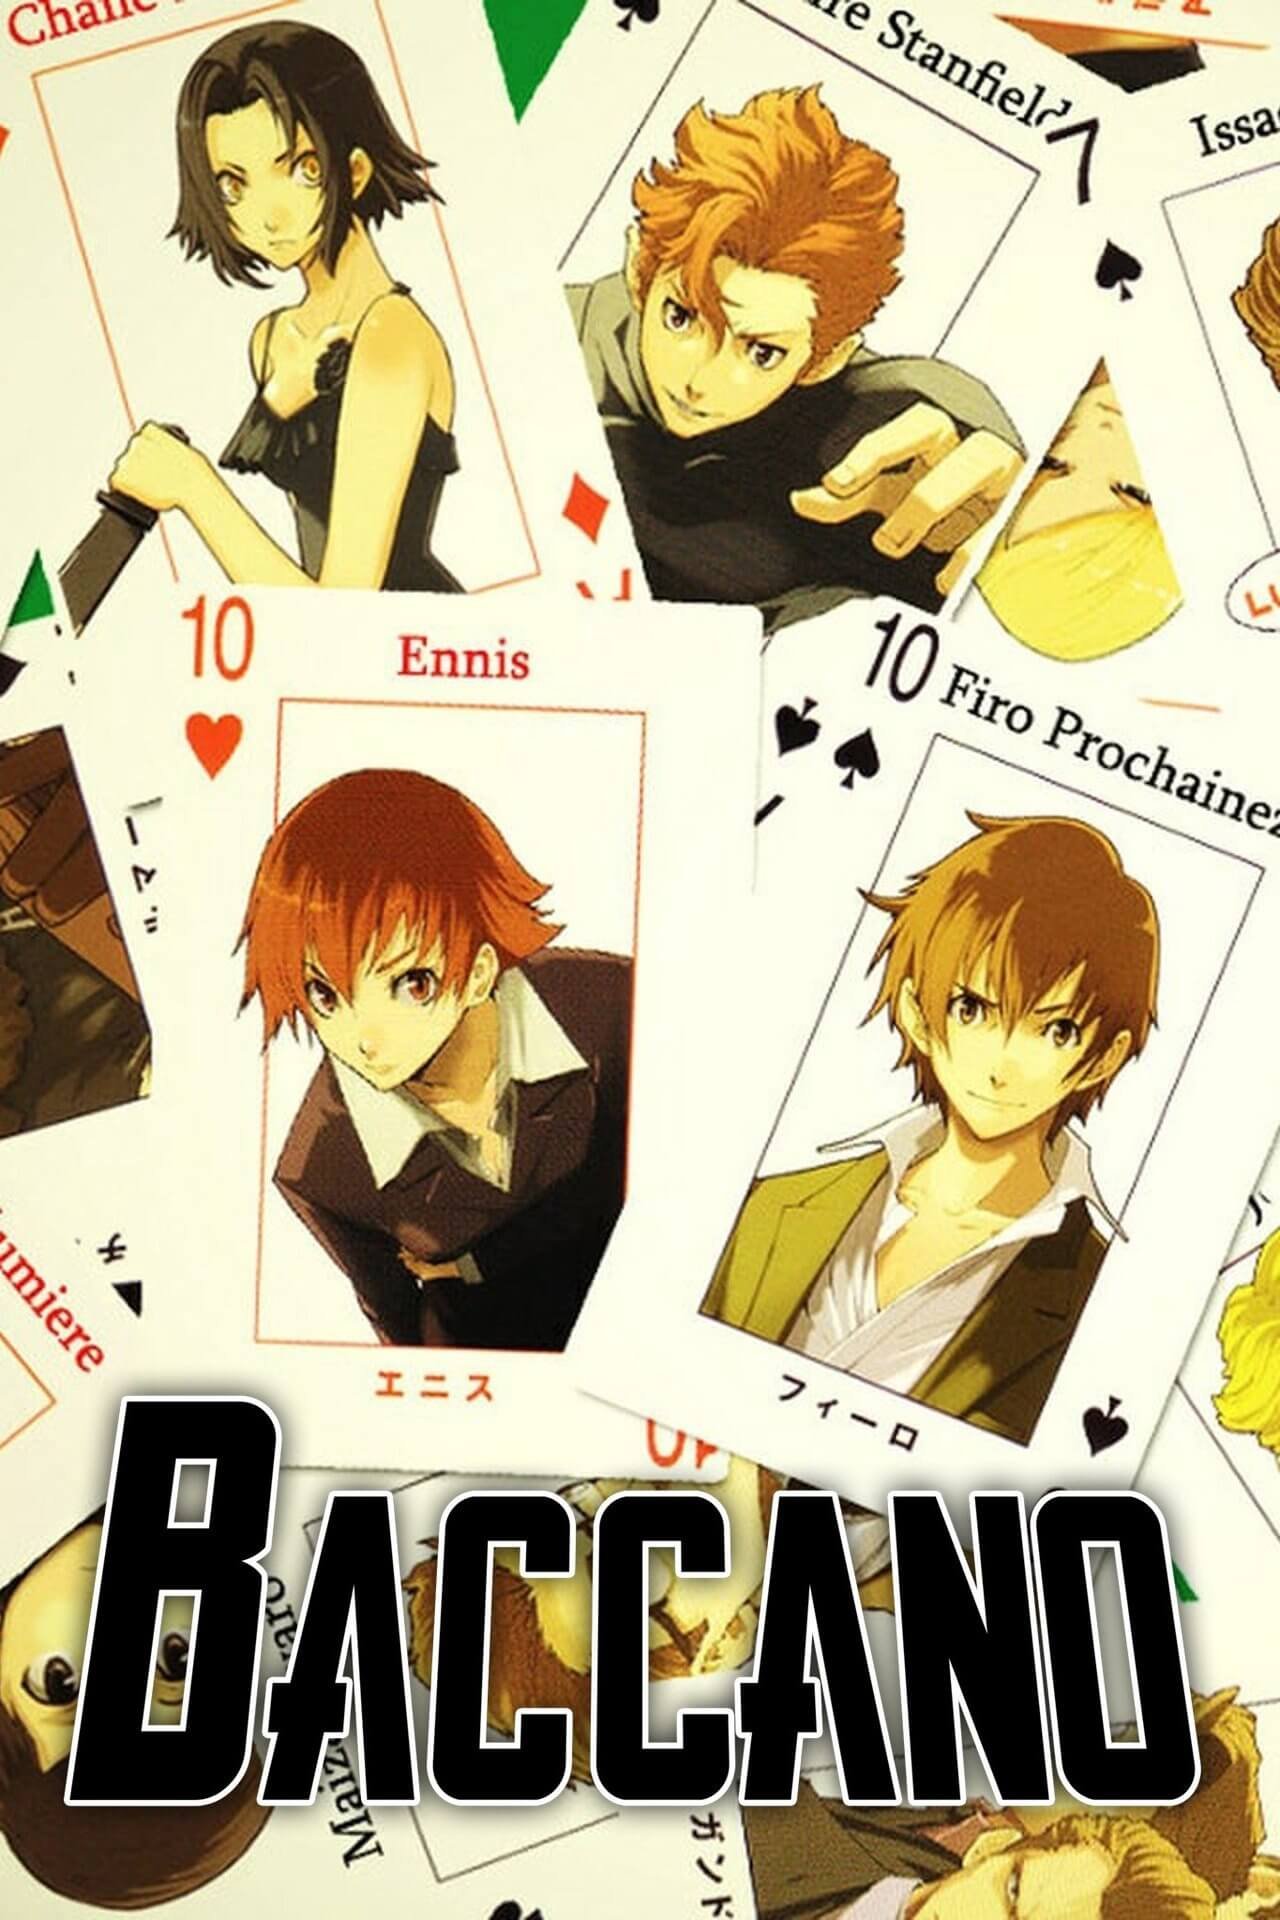 Baccano! (2007)&lt;strong&gt;#302&lt;/strong&gt;